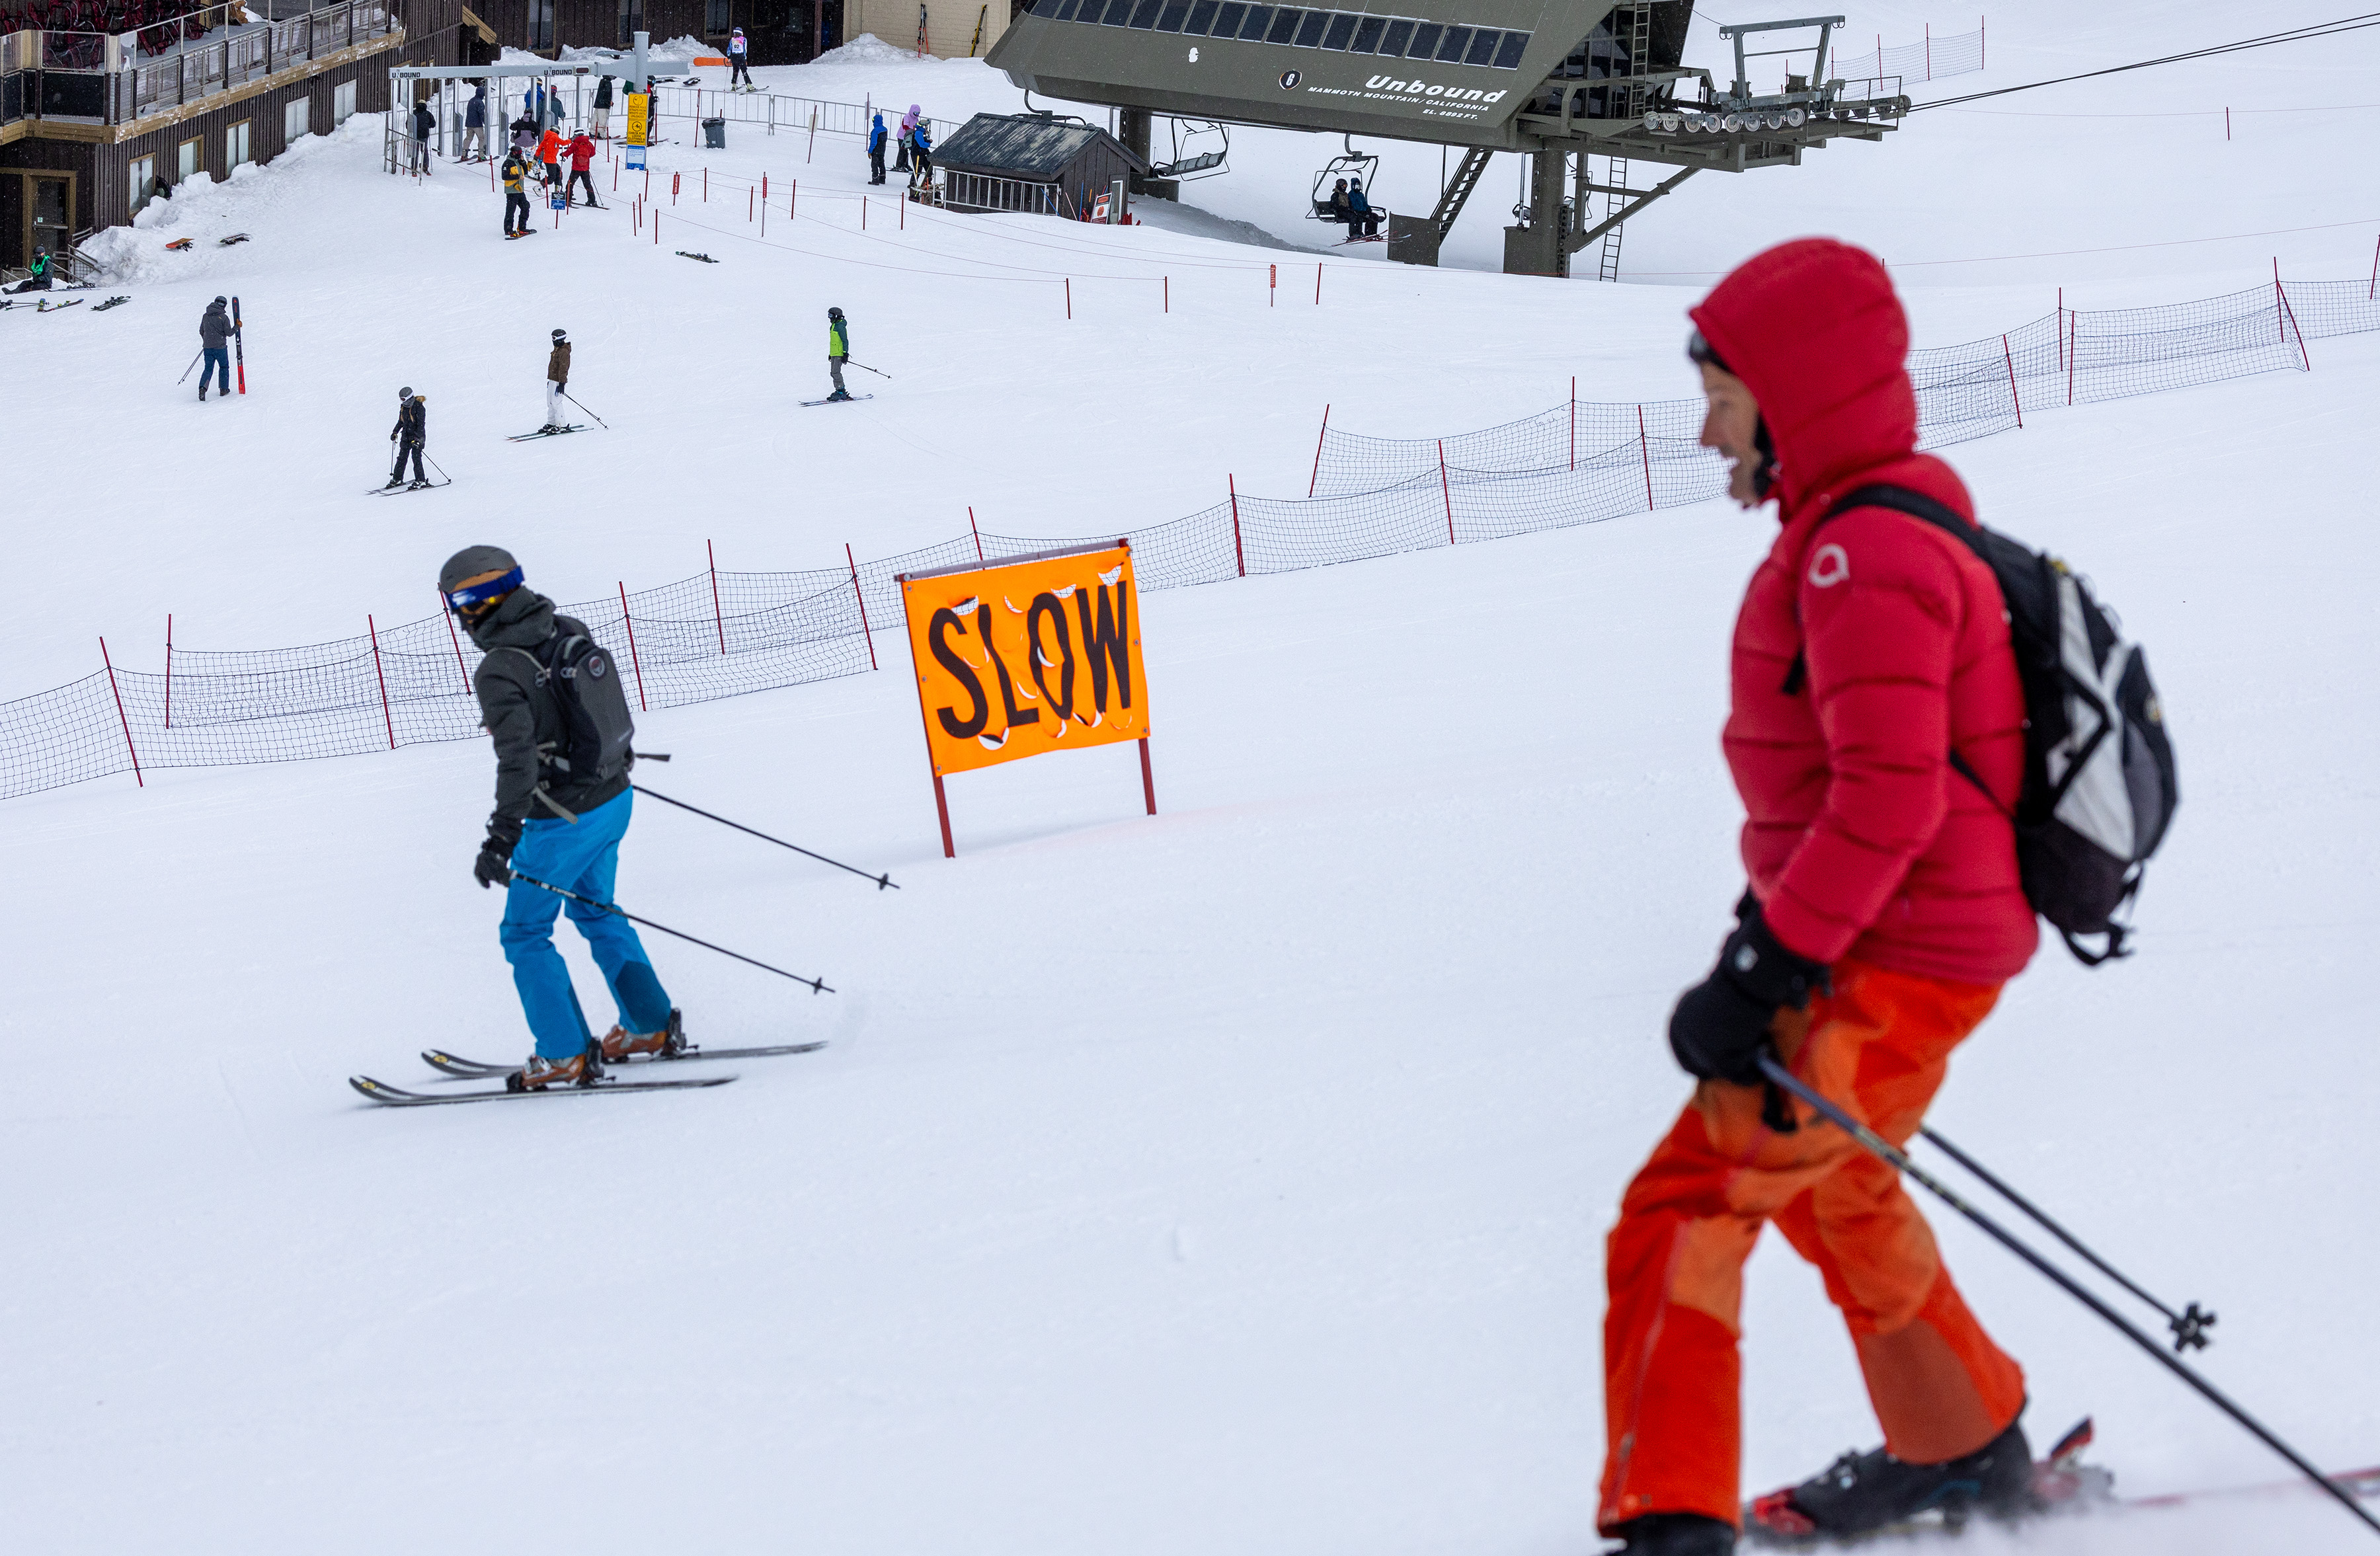 skiers on a mountain pass a "slow" sign